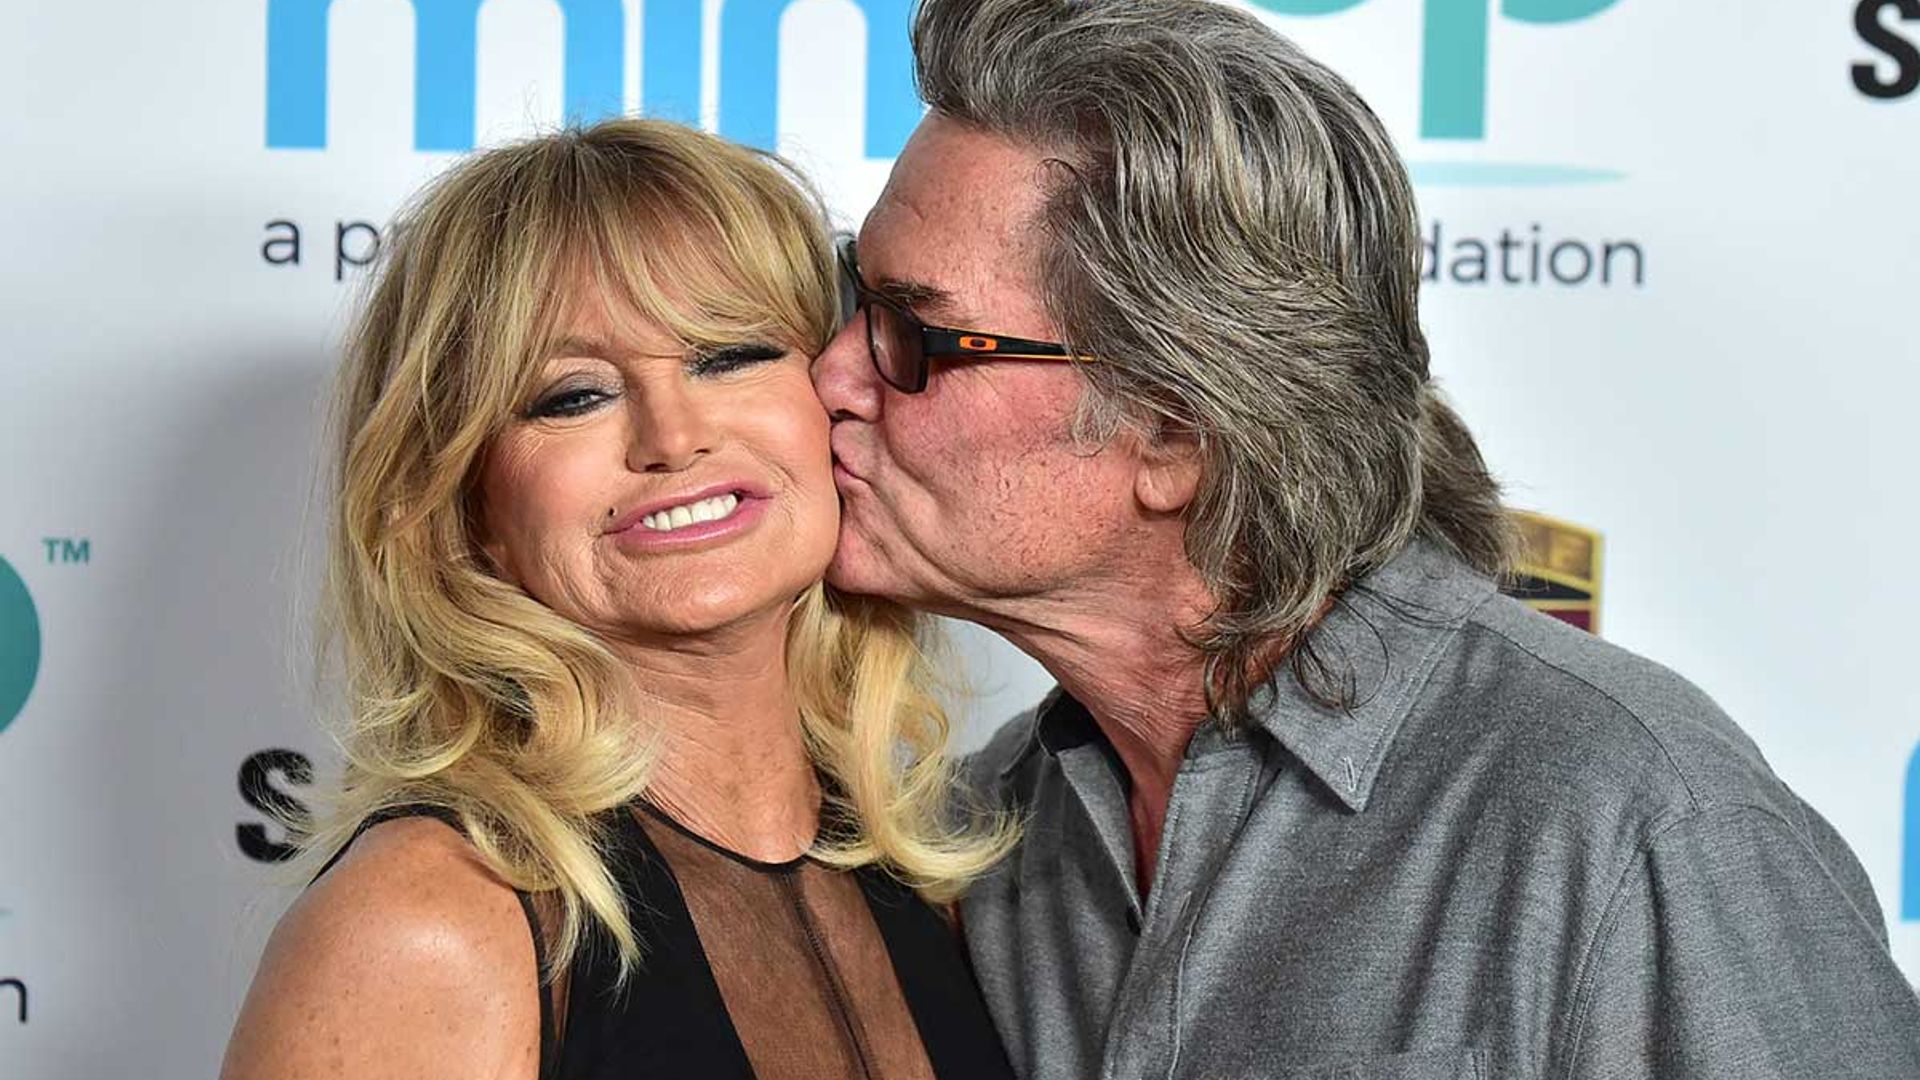 Goldie Hawn 76 Wows In Black Swimsuit During Sun Drenched Beach Vacation With Kurt Russell